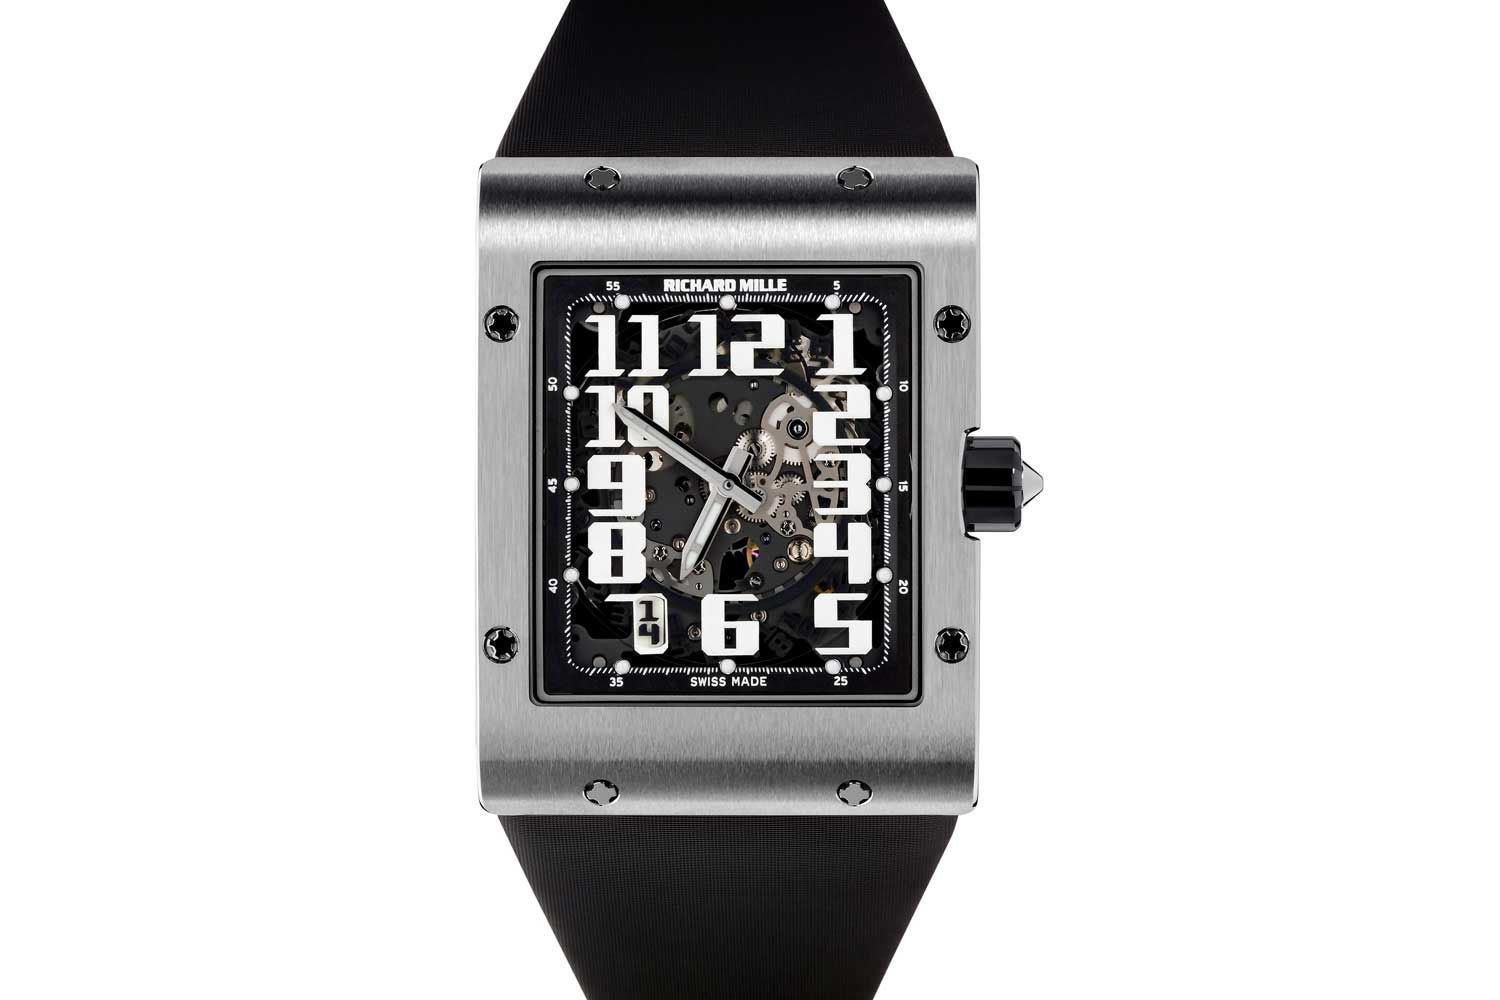 The Richard Mille RM 016 is a watch with a 38mm wide and 49.8mm long curved rectangular case that is a scant 8.25mm thick